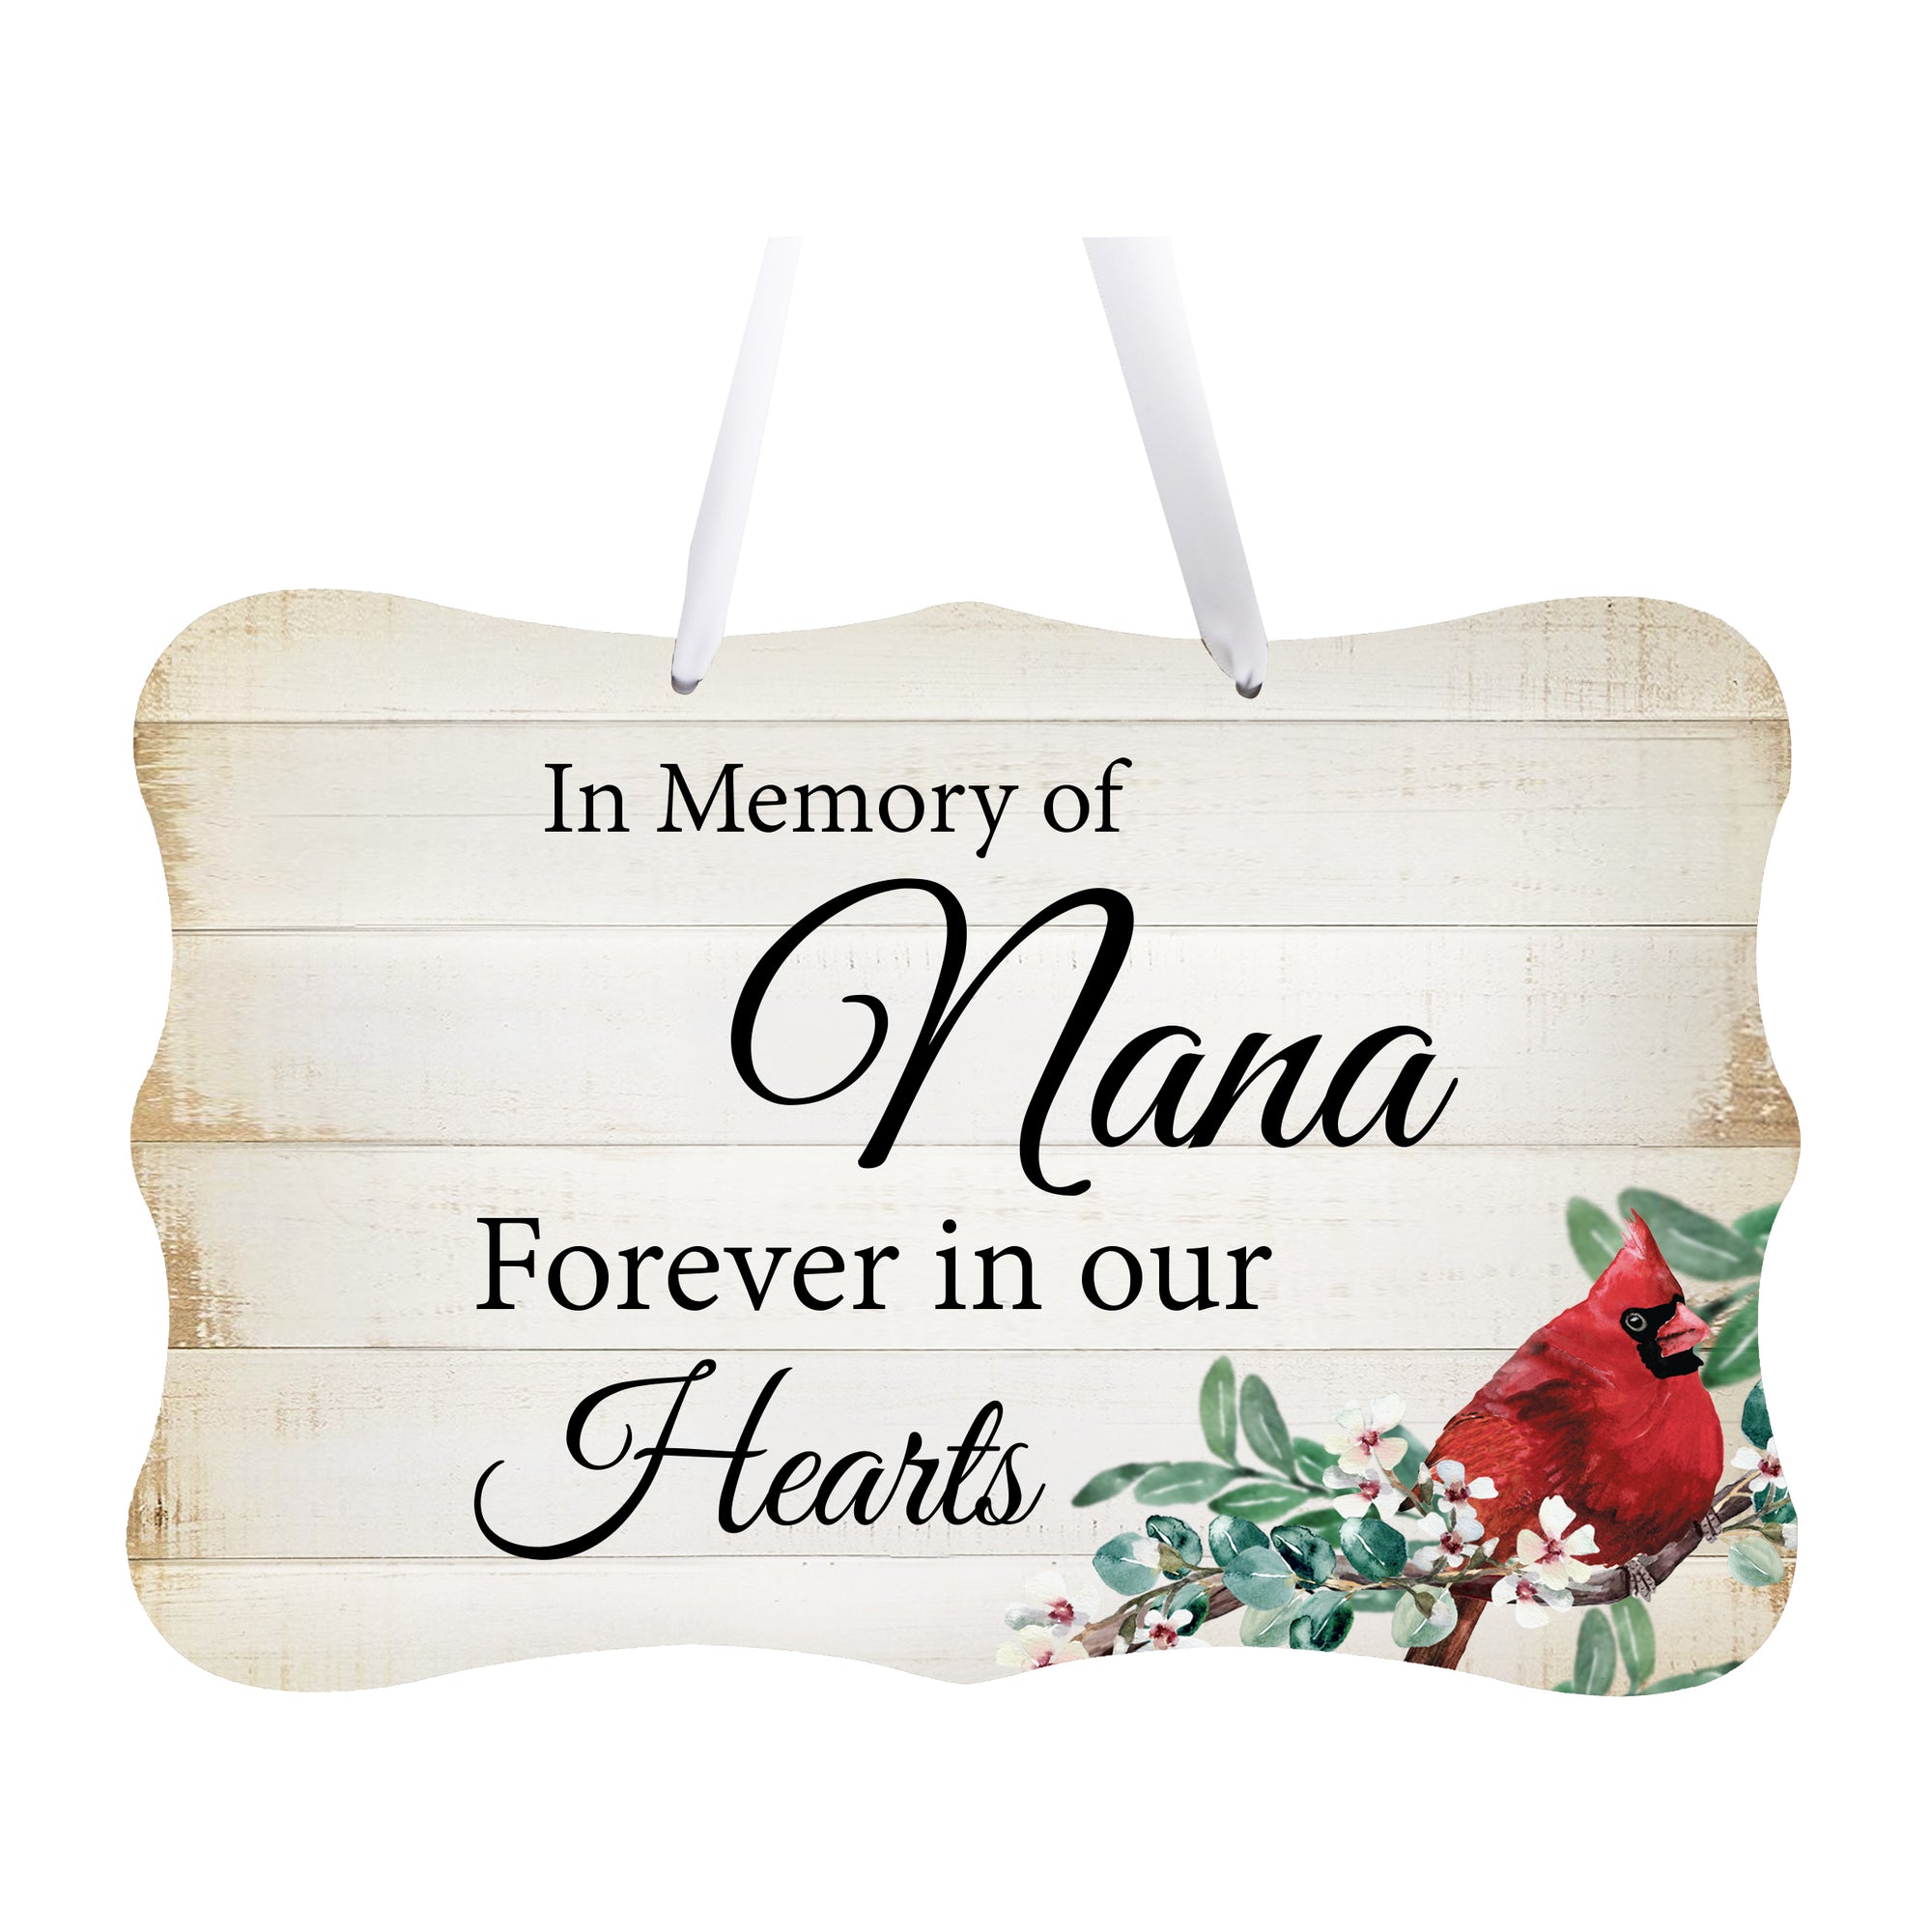 A memorial wall hanging sign adorned with a cardinal ribbon, a symbol of remembrance.